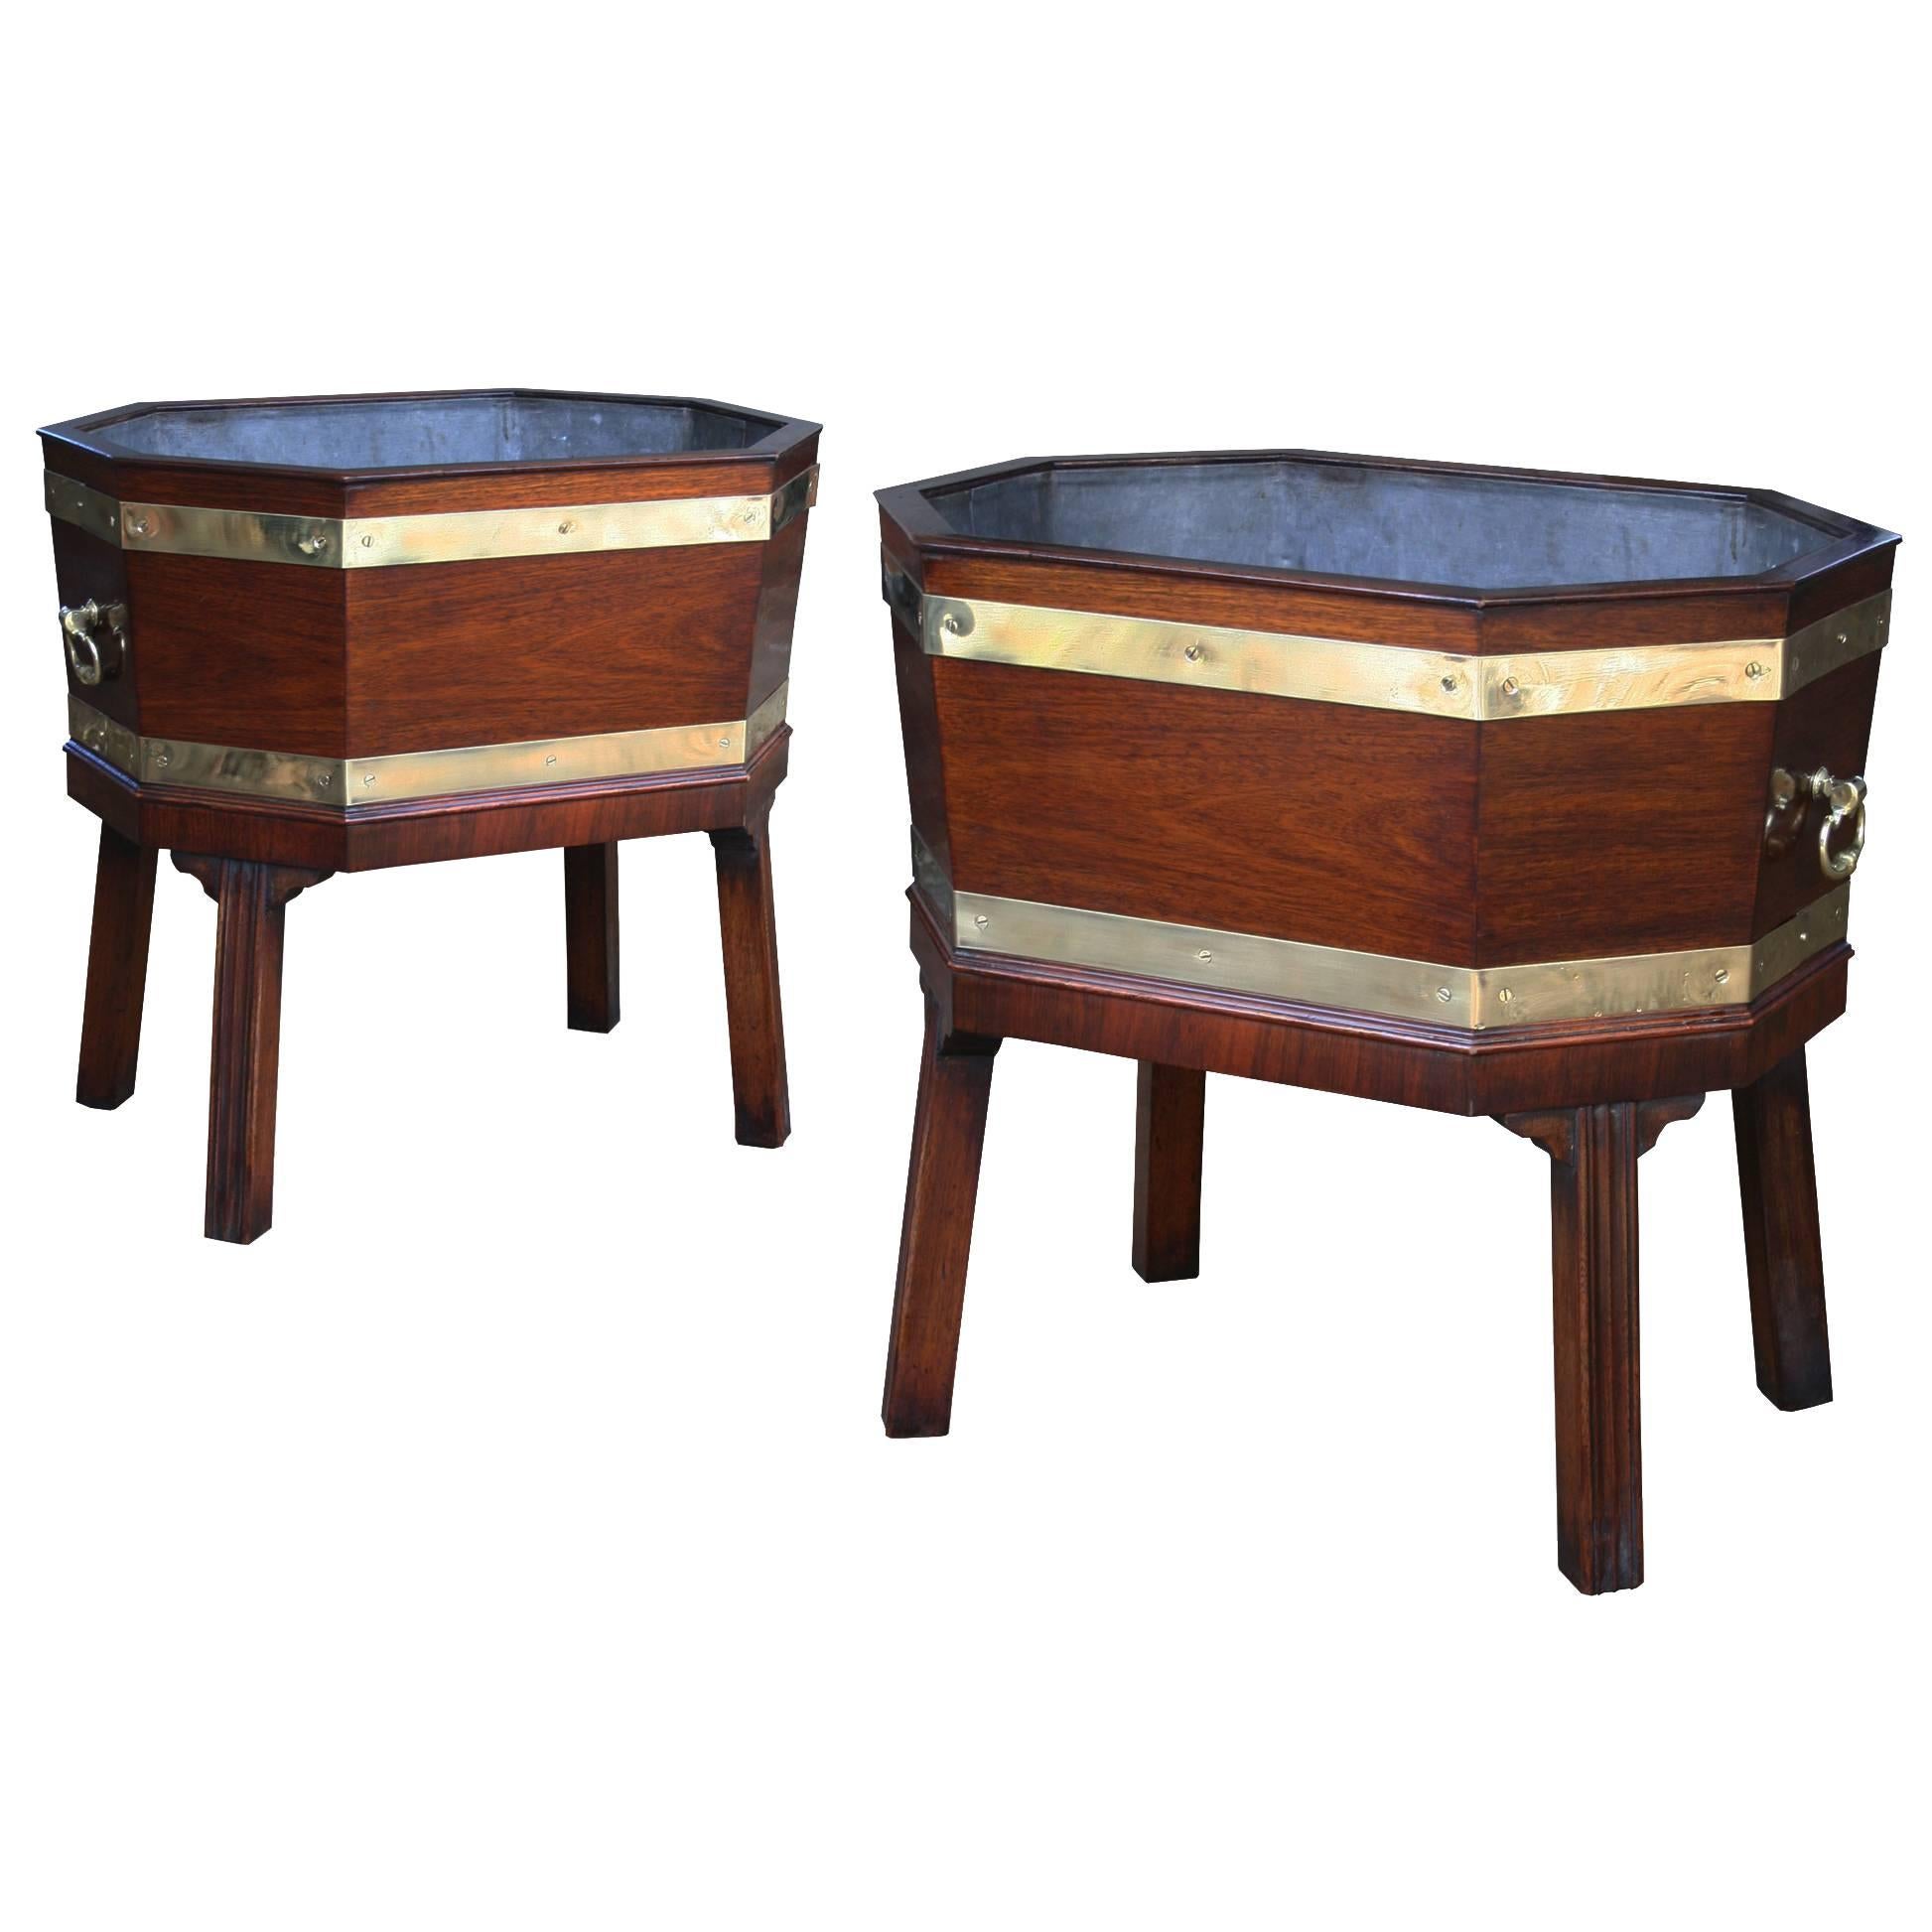 Pair of Brass Bound Rosewood Wine Coolers